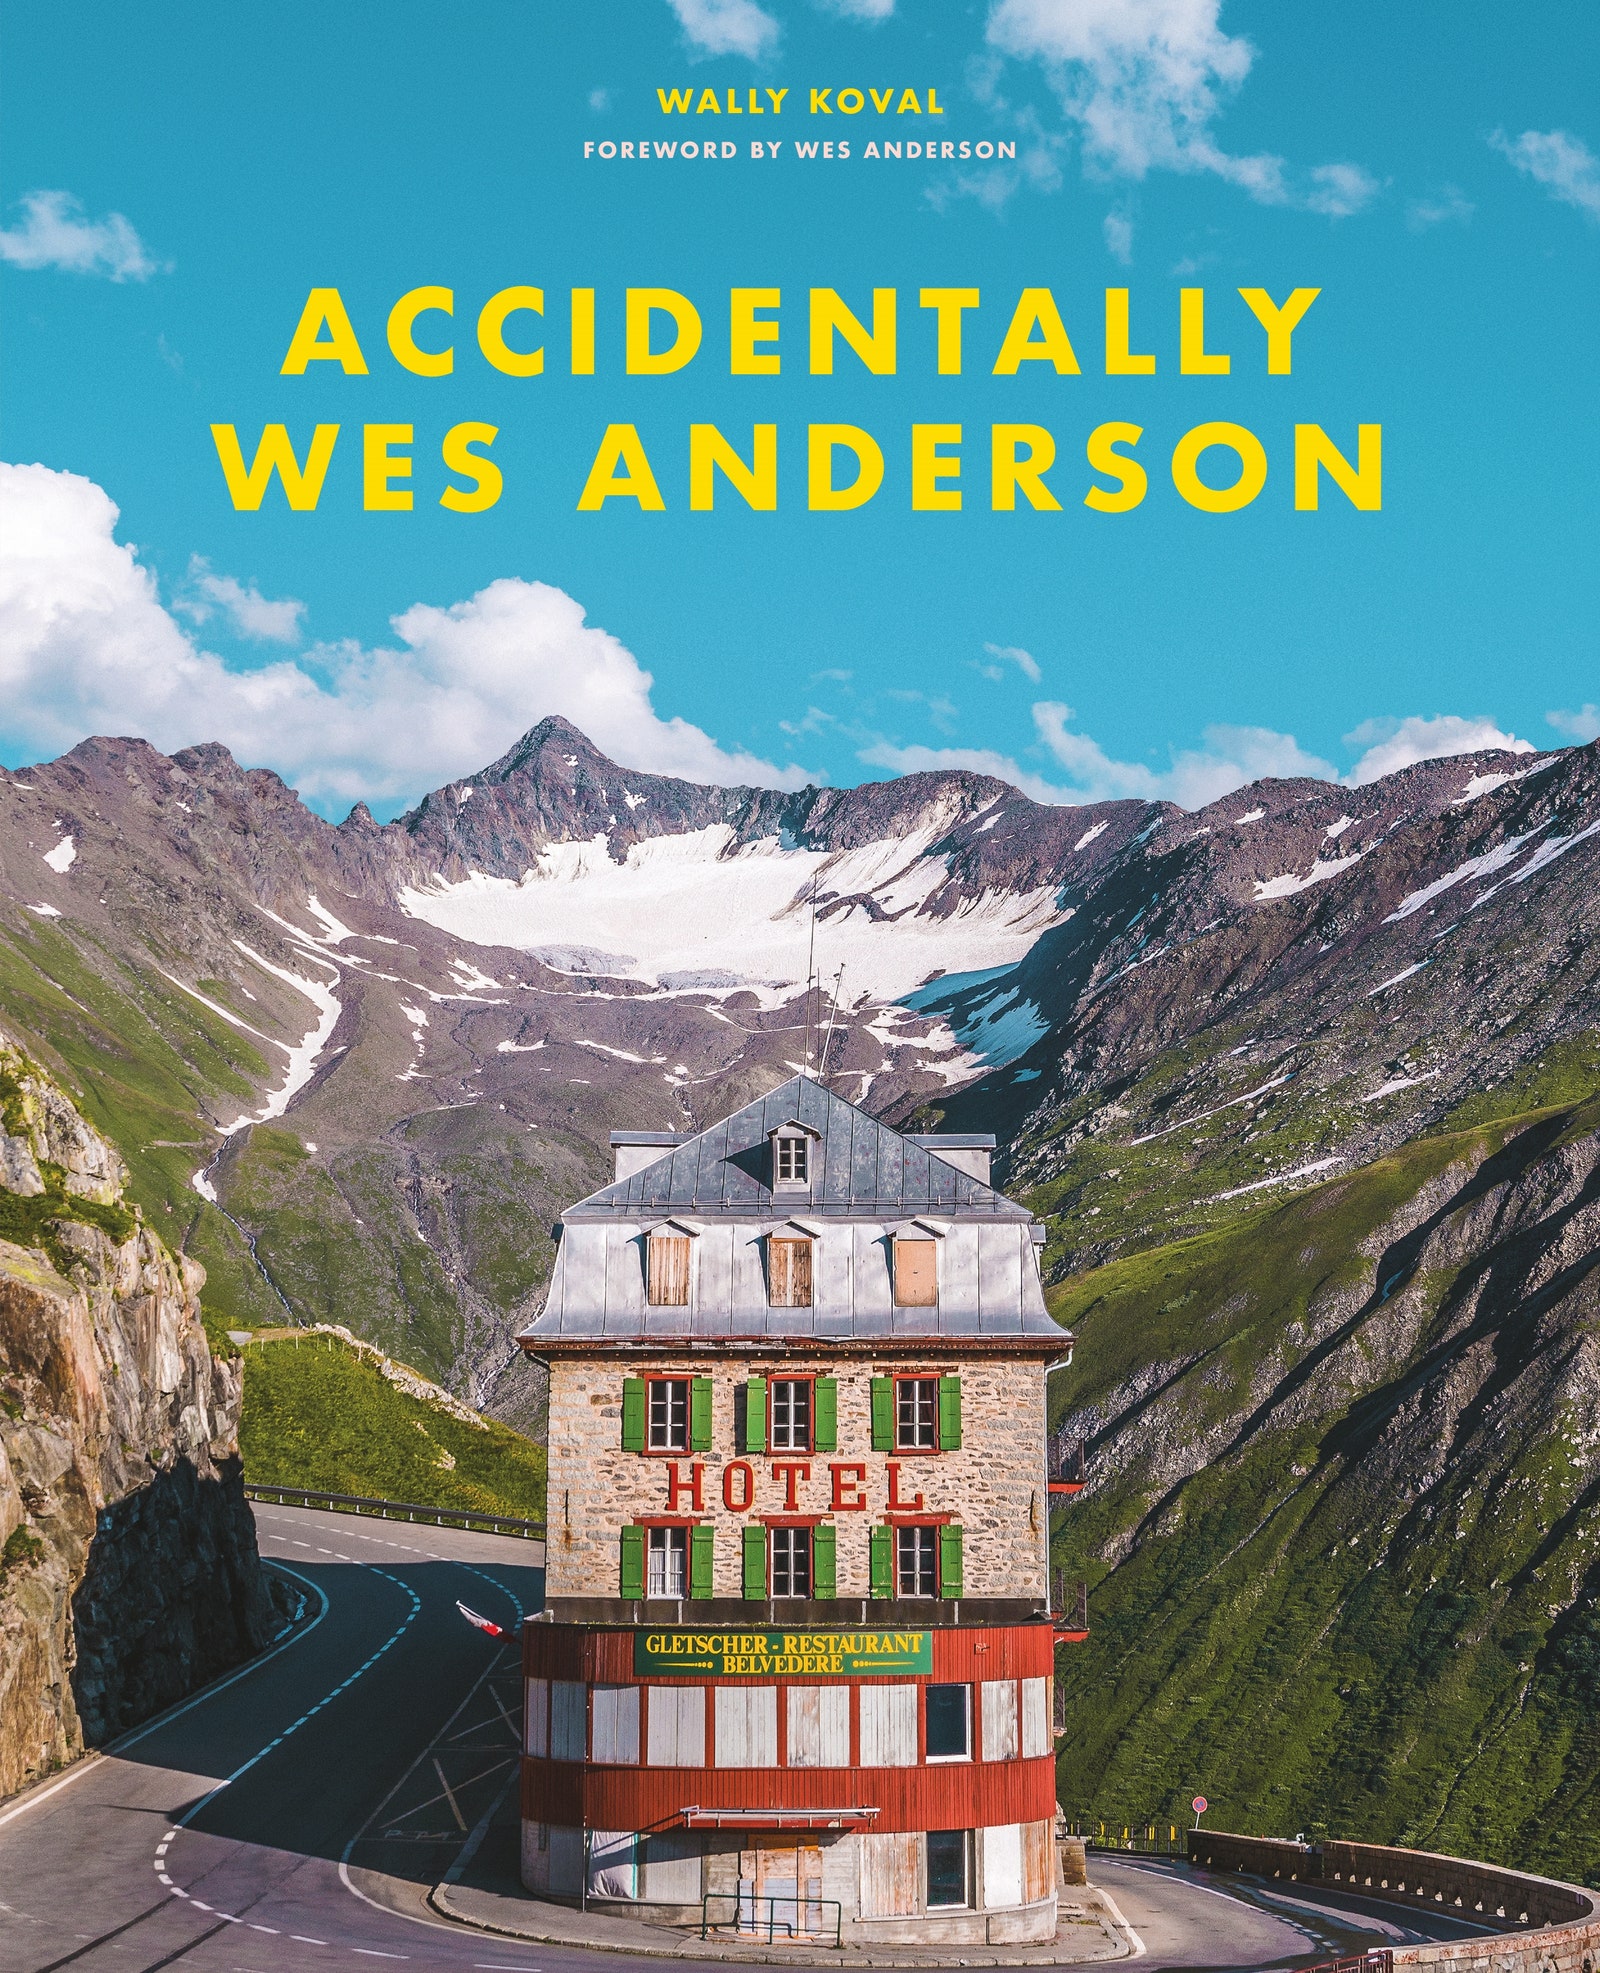 Accidentally Wes Anderson by Wally Koval published in Hardback by Trapeze.